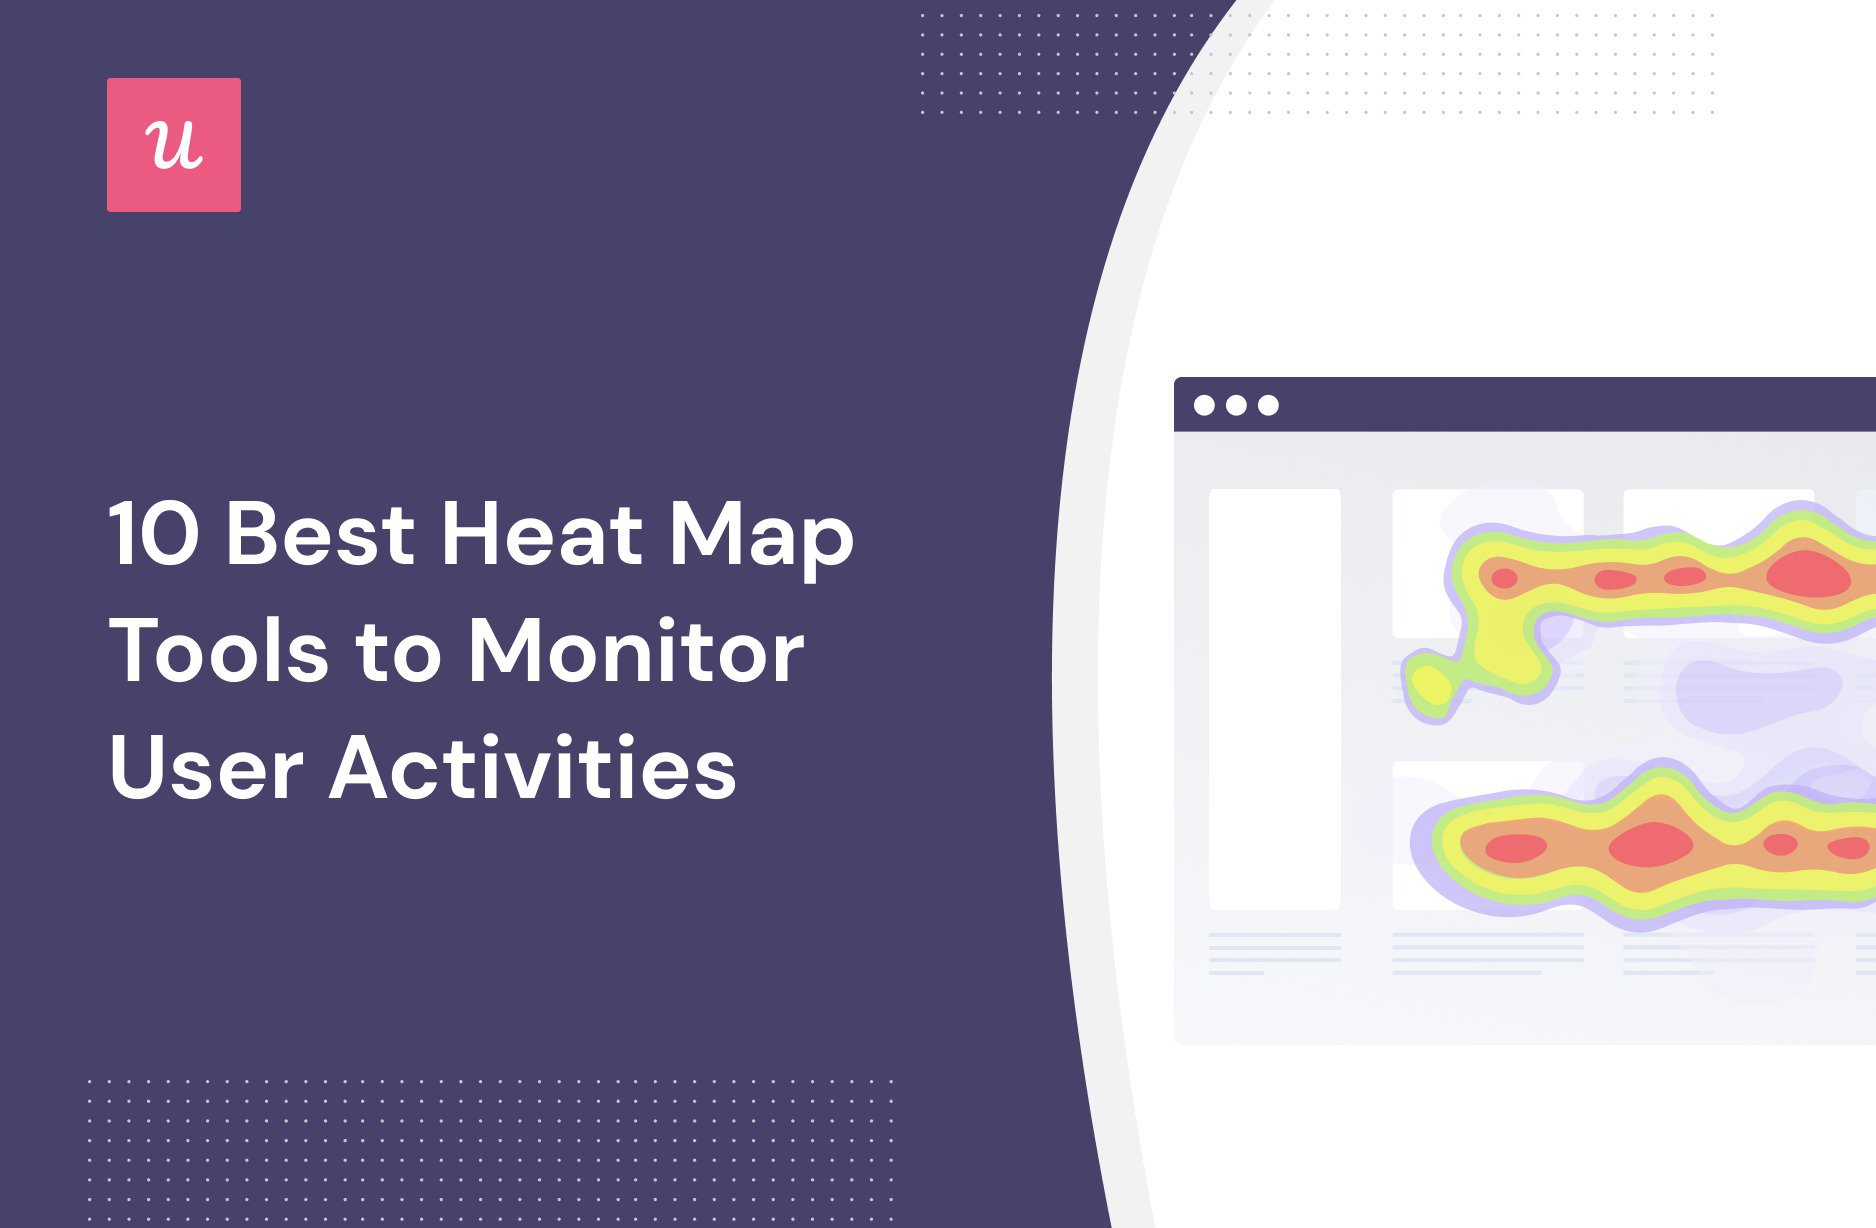 10 Best Heat Map Tools to Monitor User Activities cover